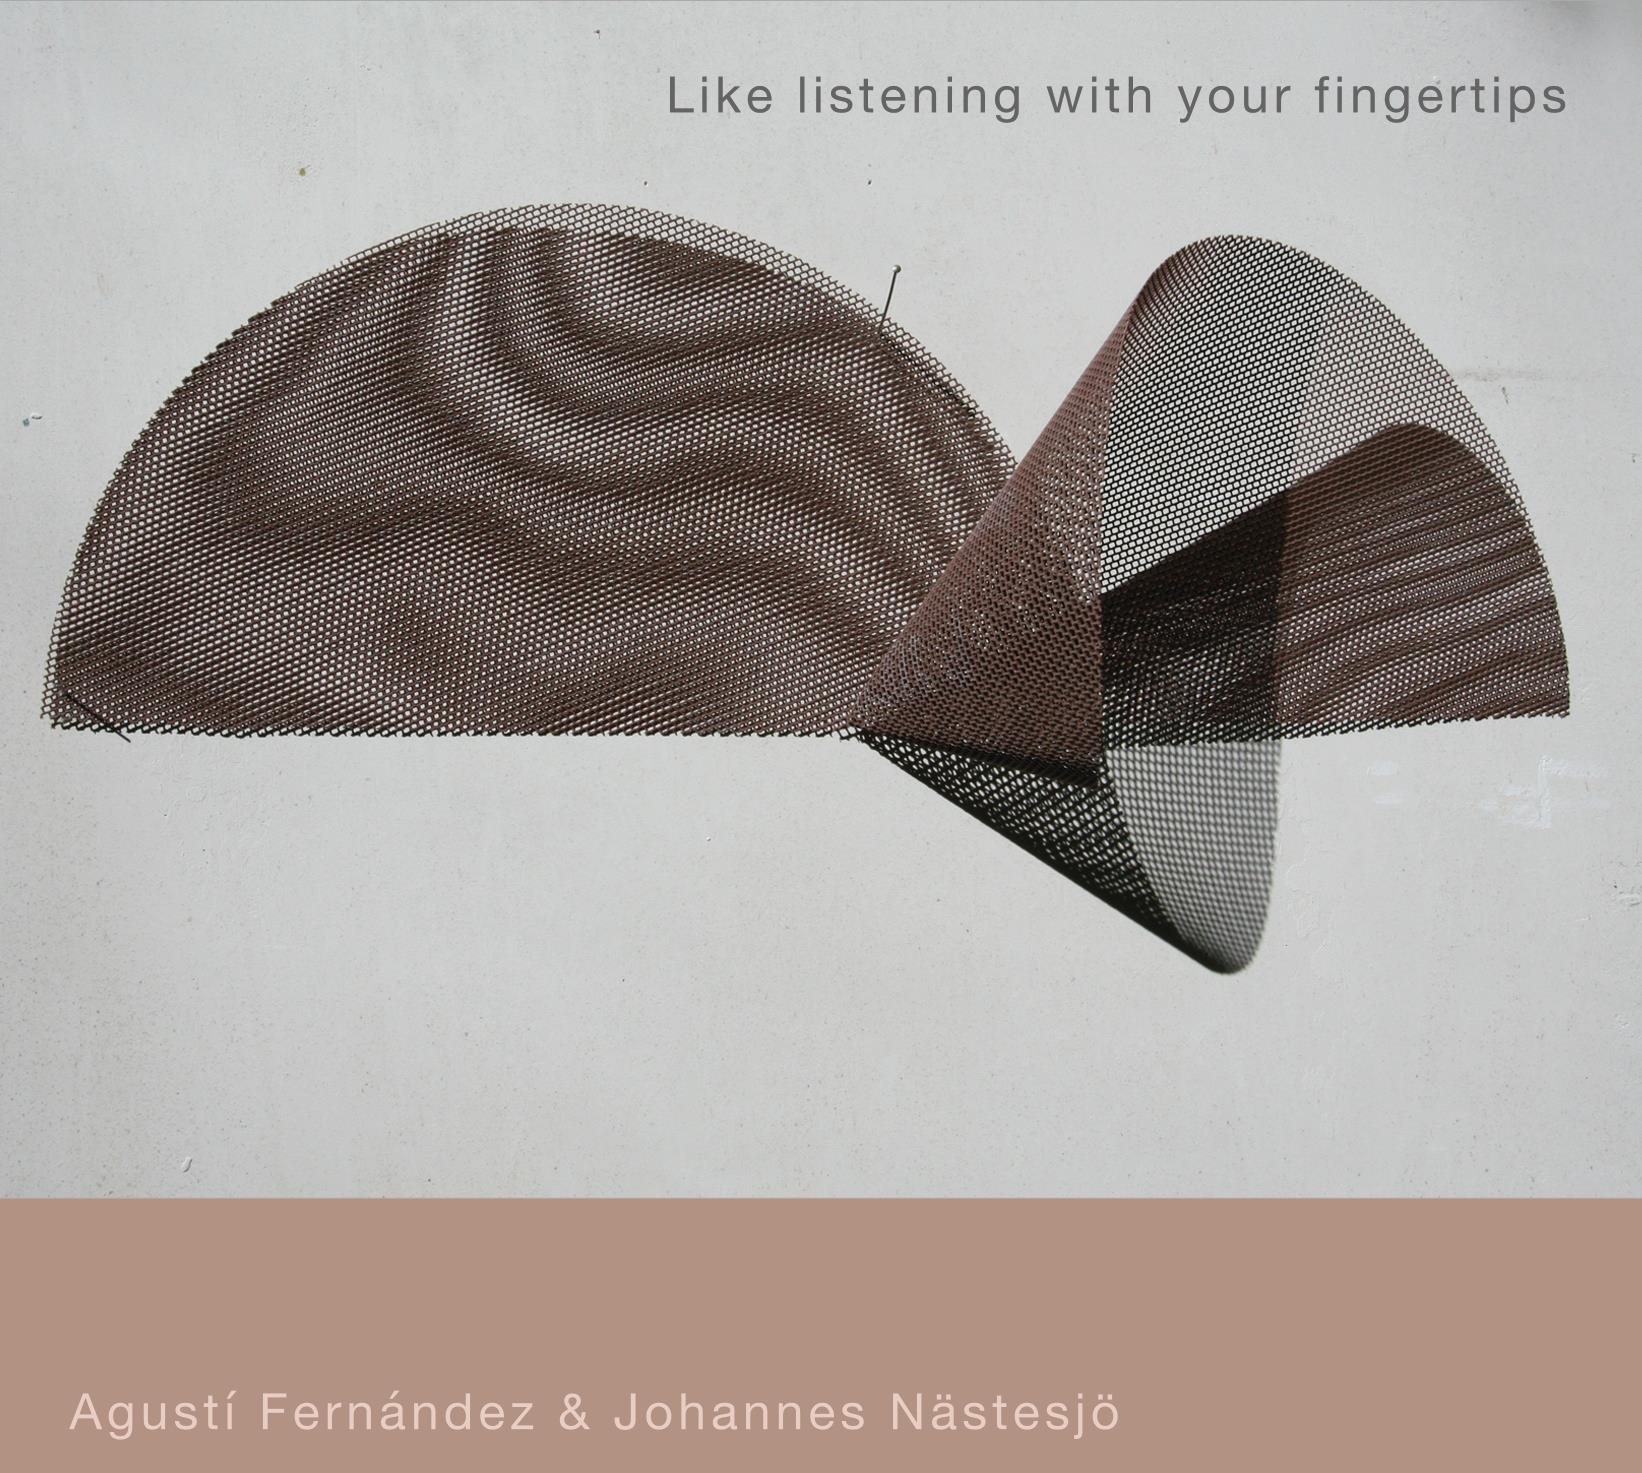 LIKE LISTENING WITH YOUR FINGERTIPS